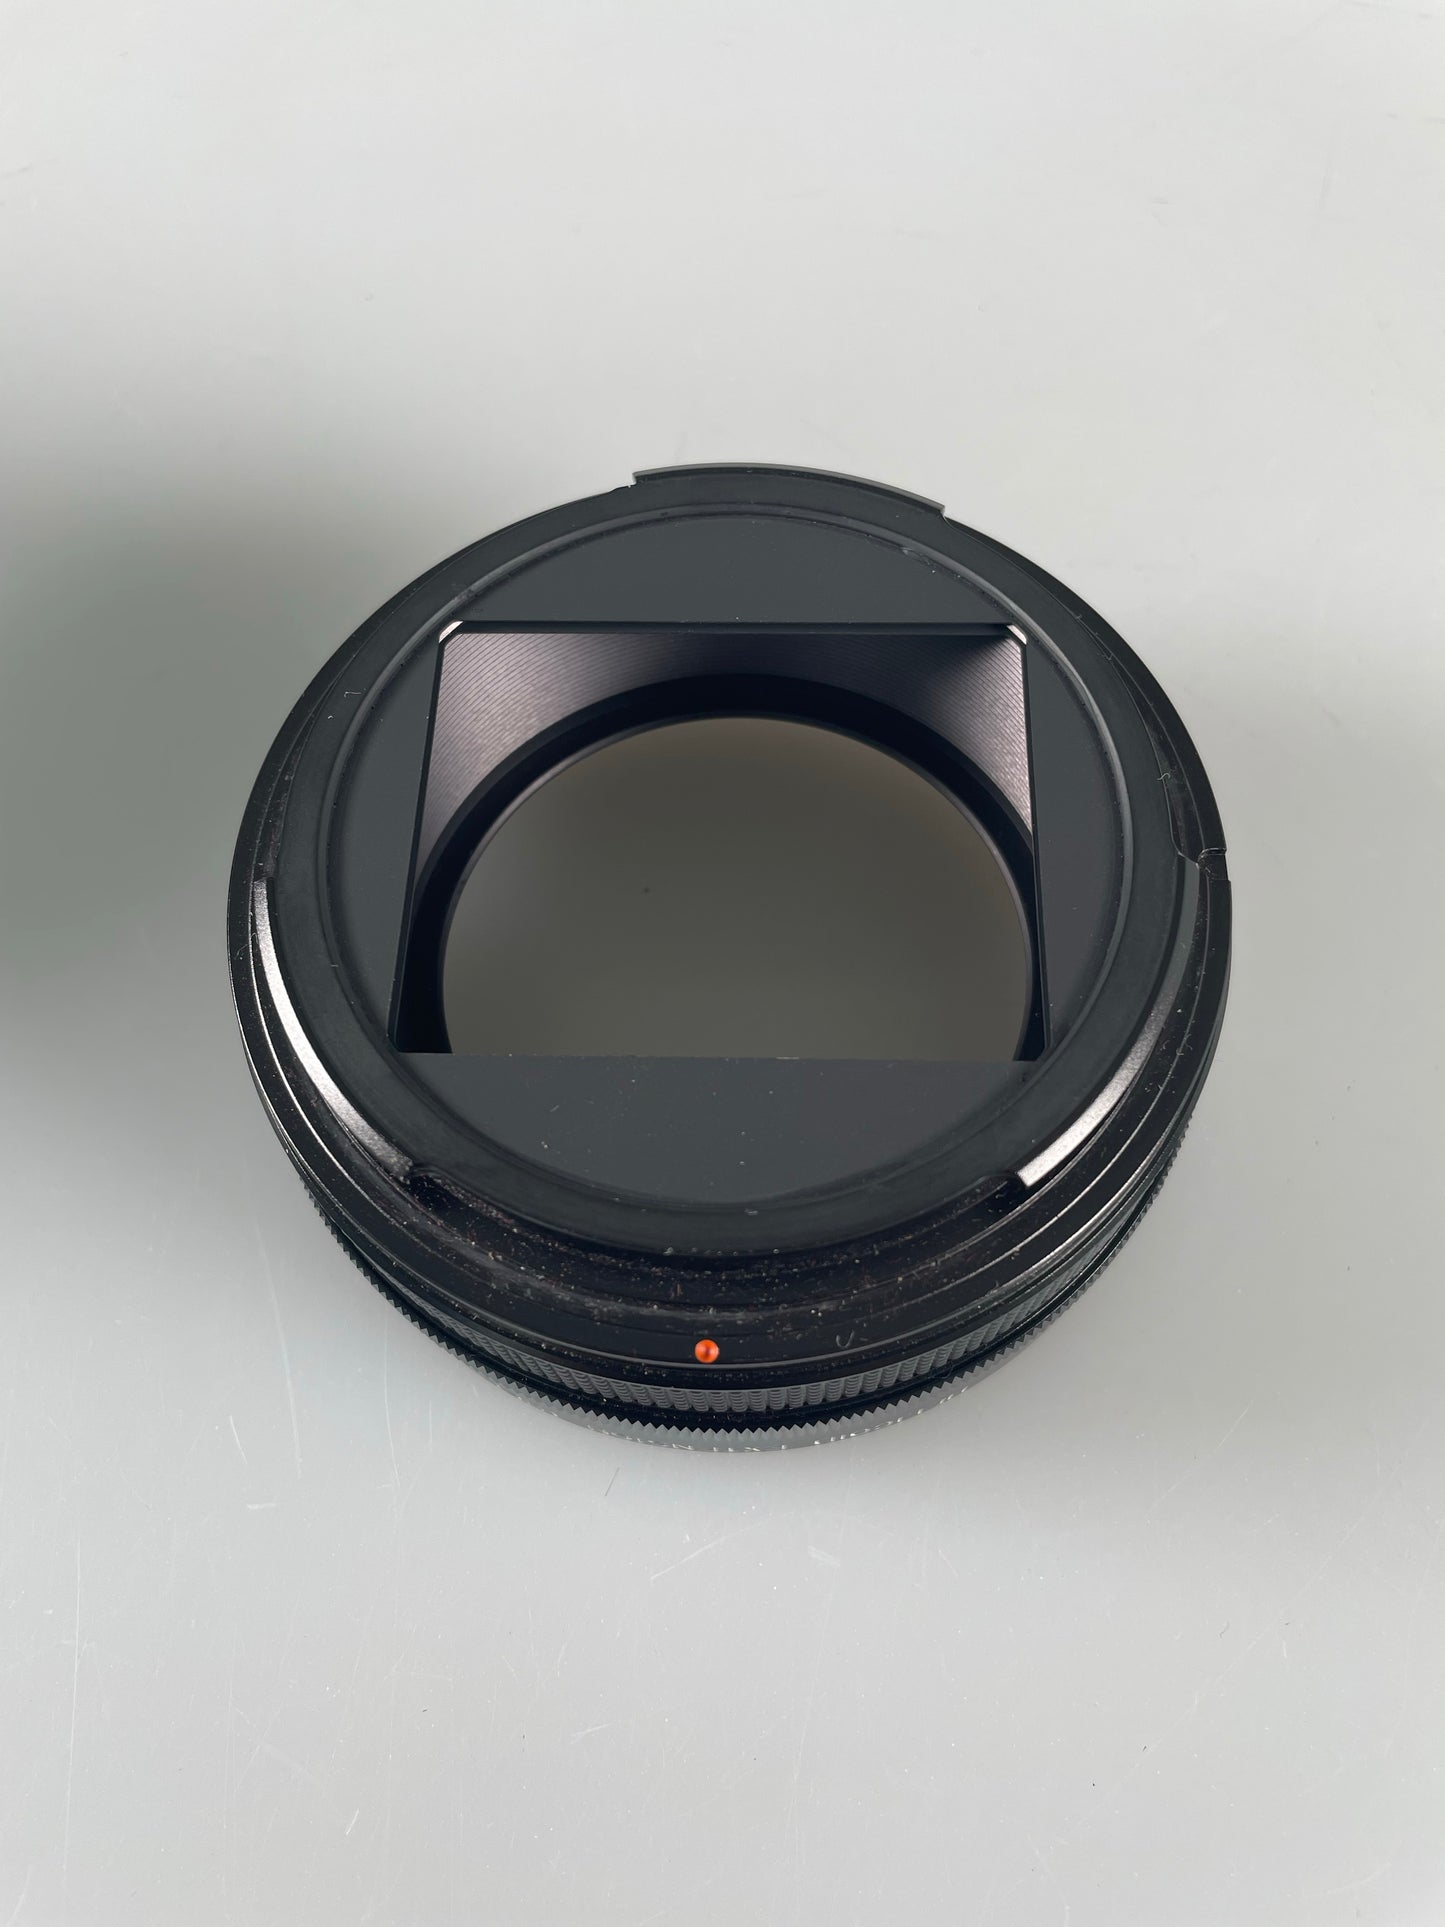 Pentax Helicoid Extension Tube 67 6x7